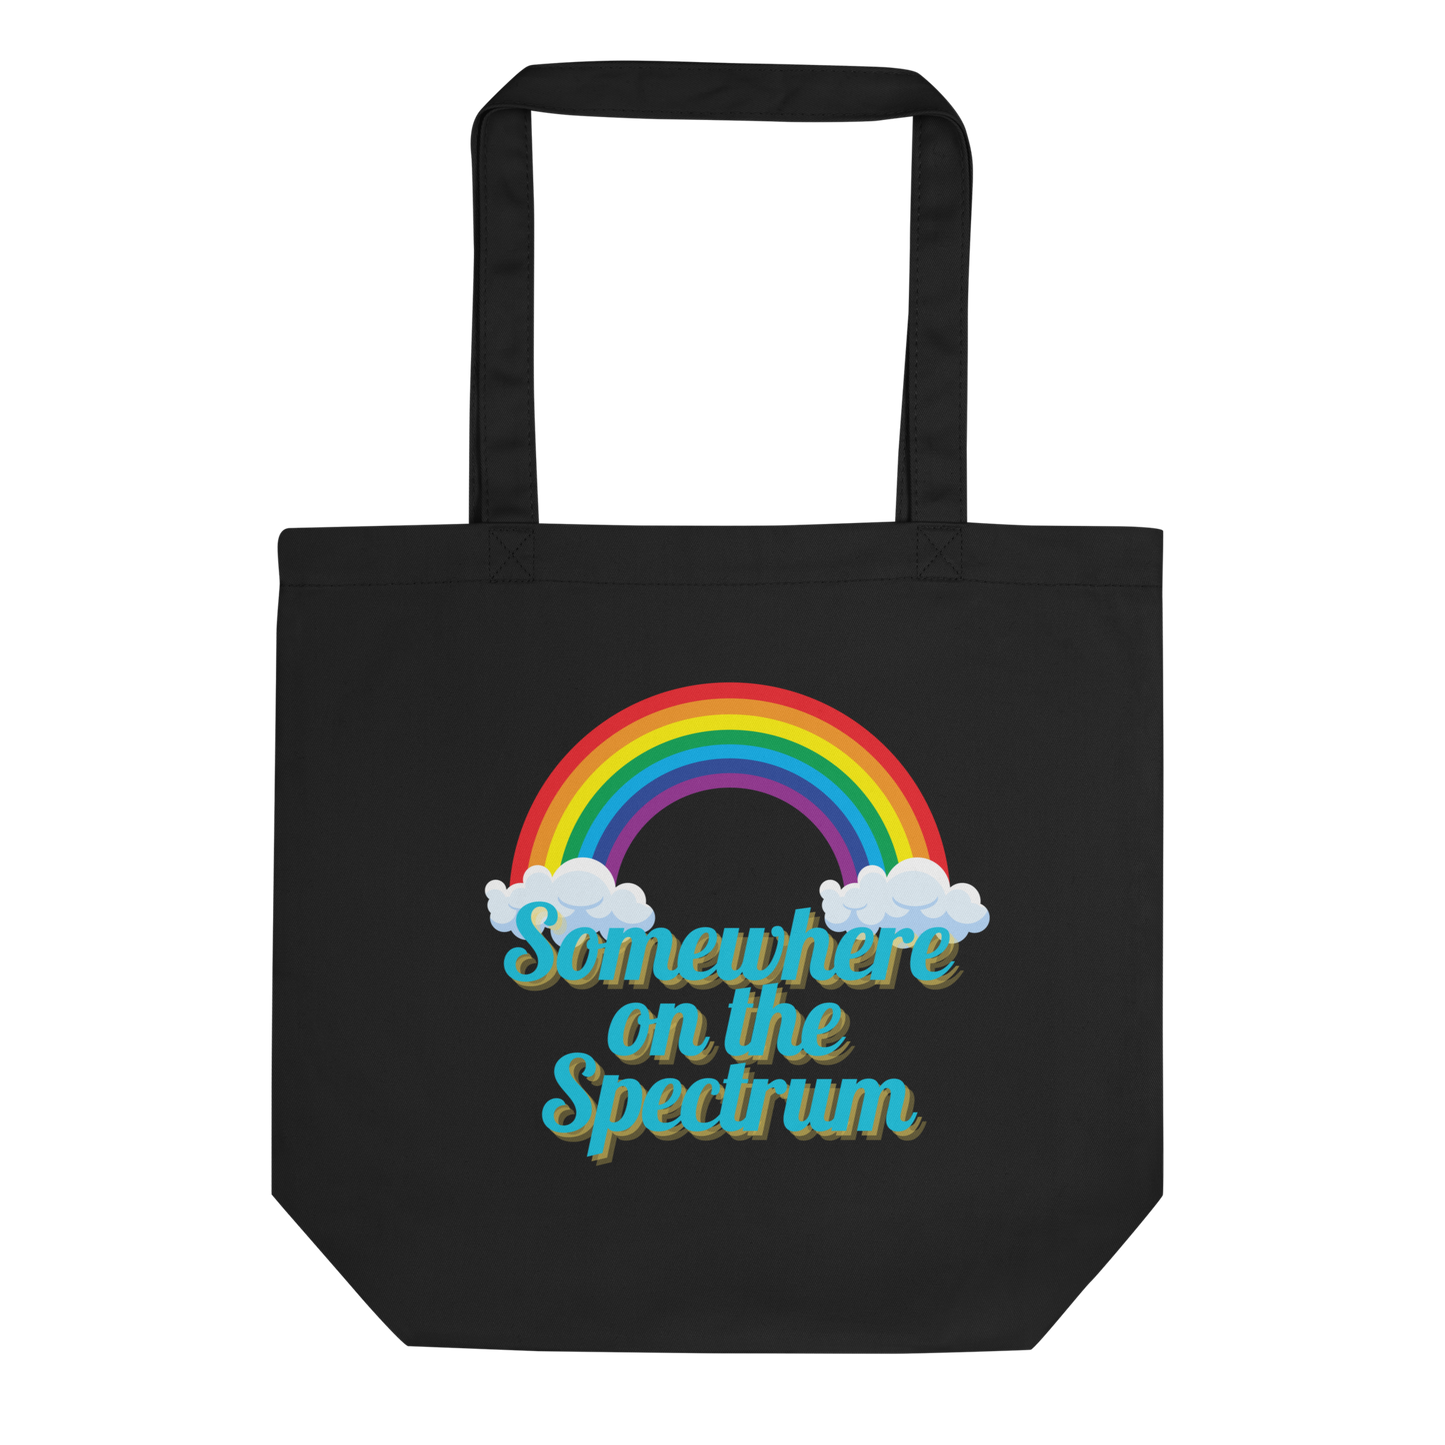 Somewhere on the Spectrum Blue Eco Tote Bag